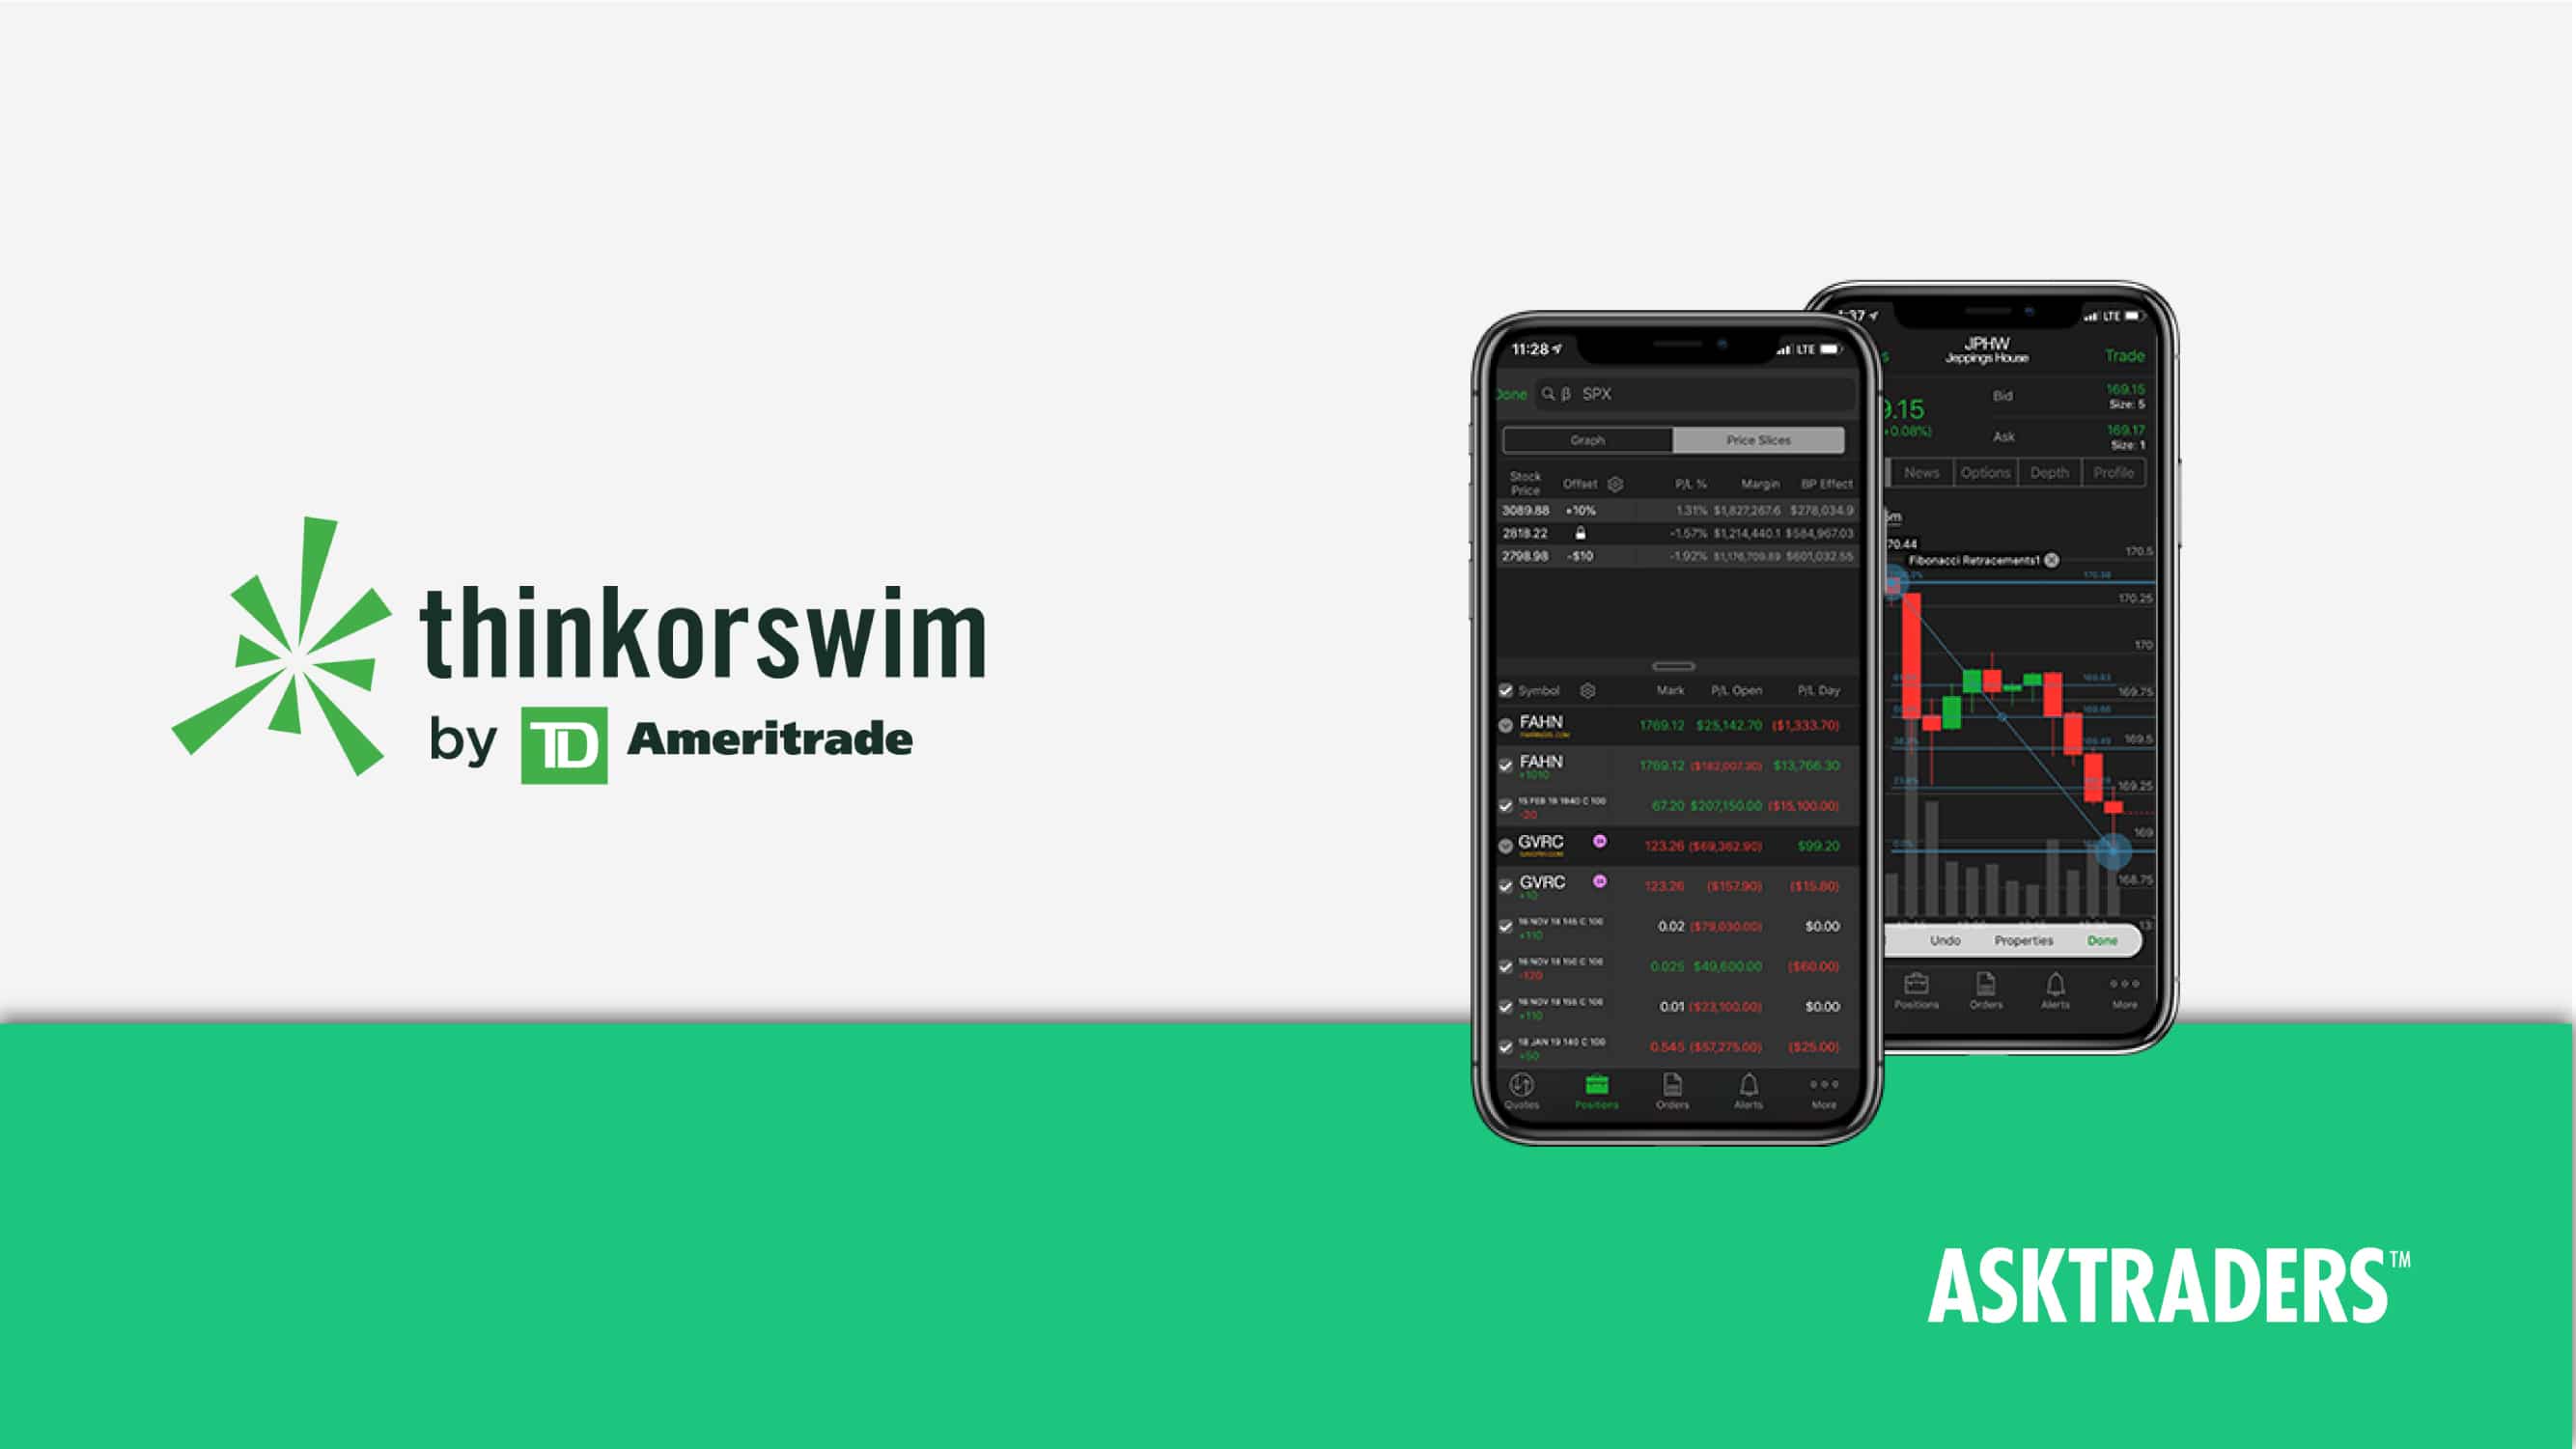 thinkorswim: Mobile Trading App With a Learning Center